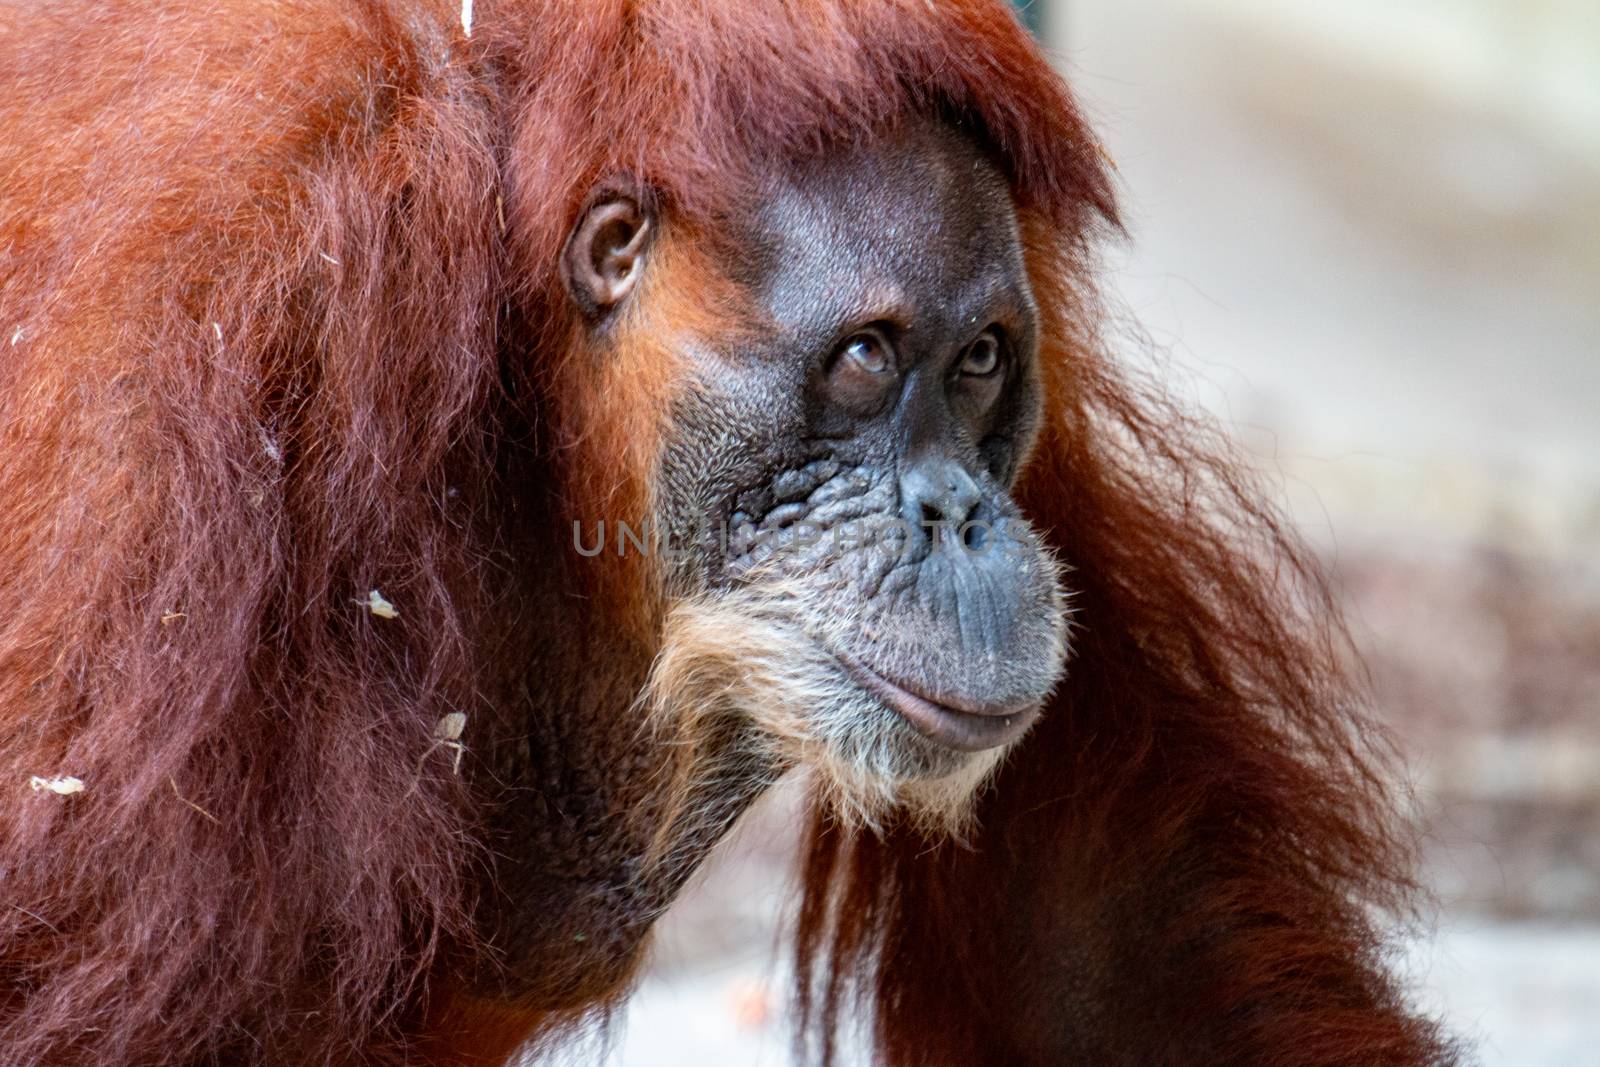 orangutans are an endangered primate species that is native to Sumatra and Borneo